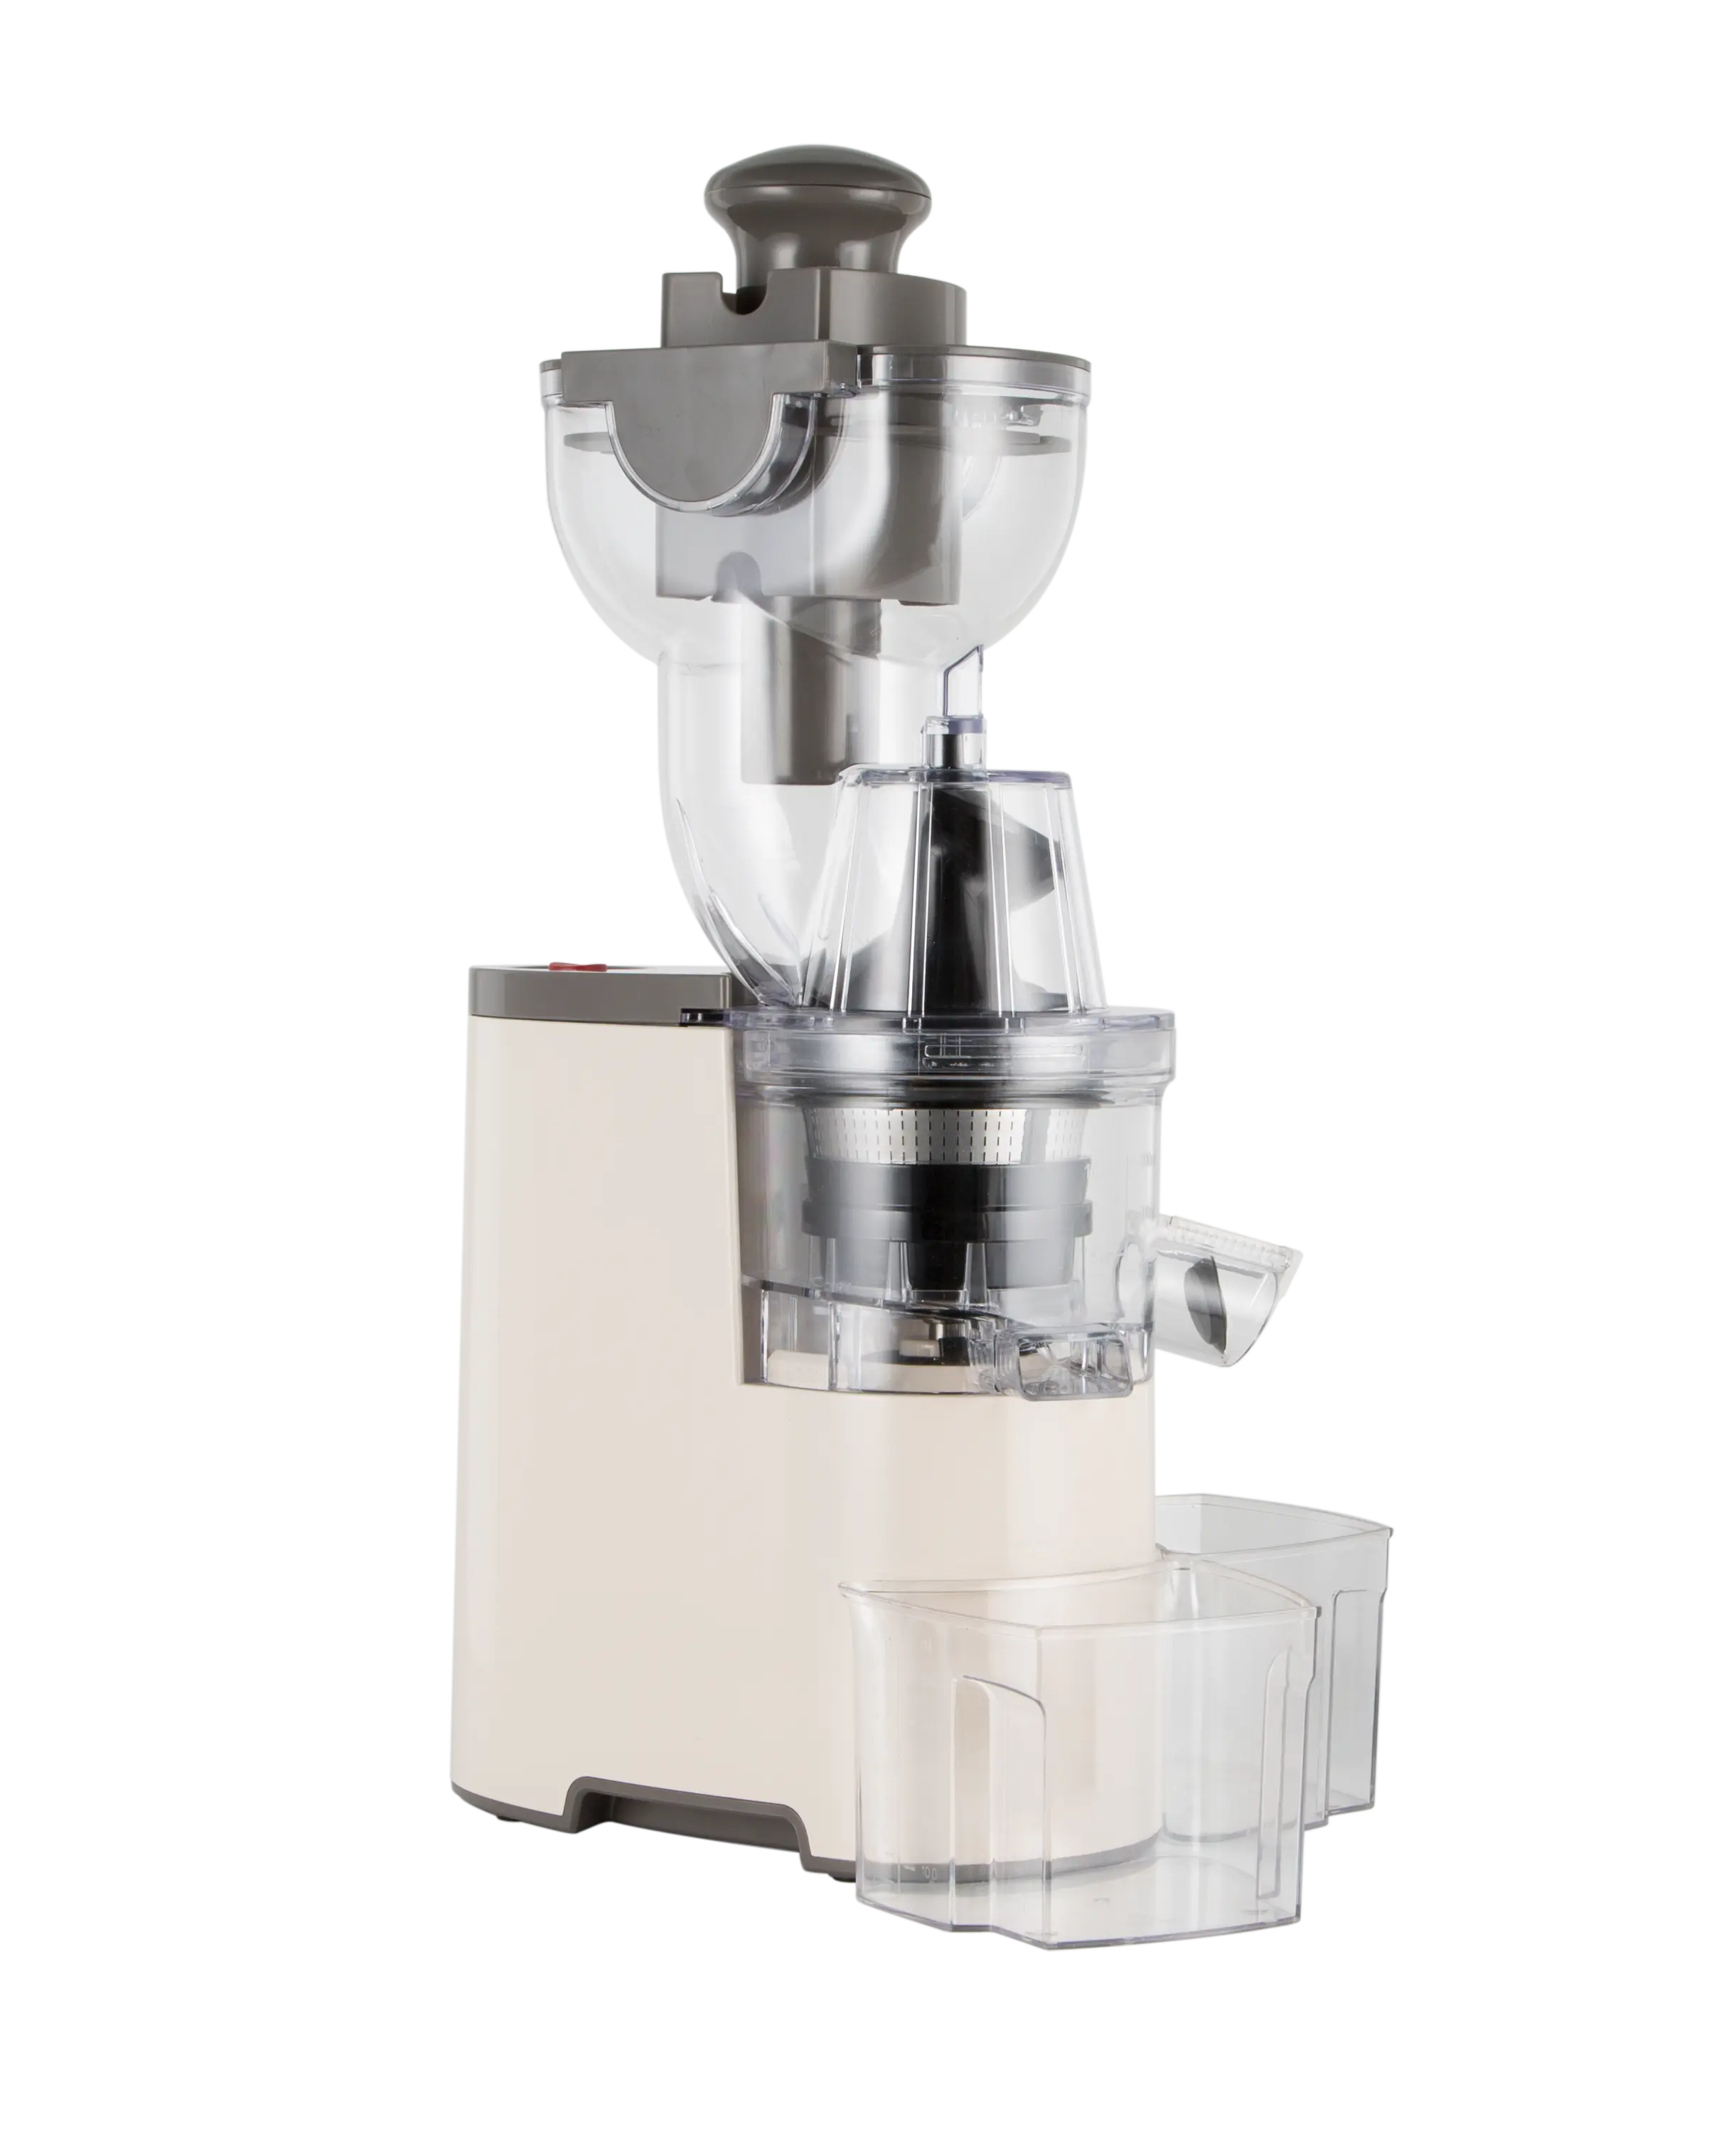 2022 New Arrival Big feeding mouth Easy to clean juicer- Low noise & reverse function - Auto dregs separation slow juicer